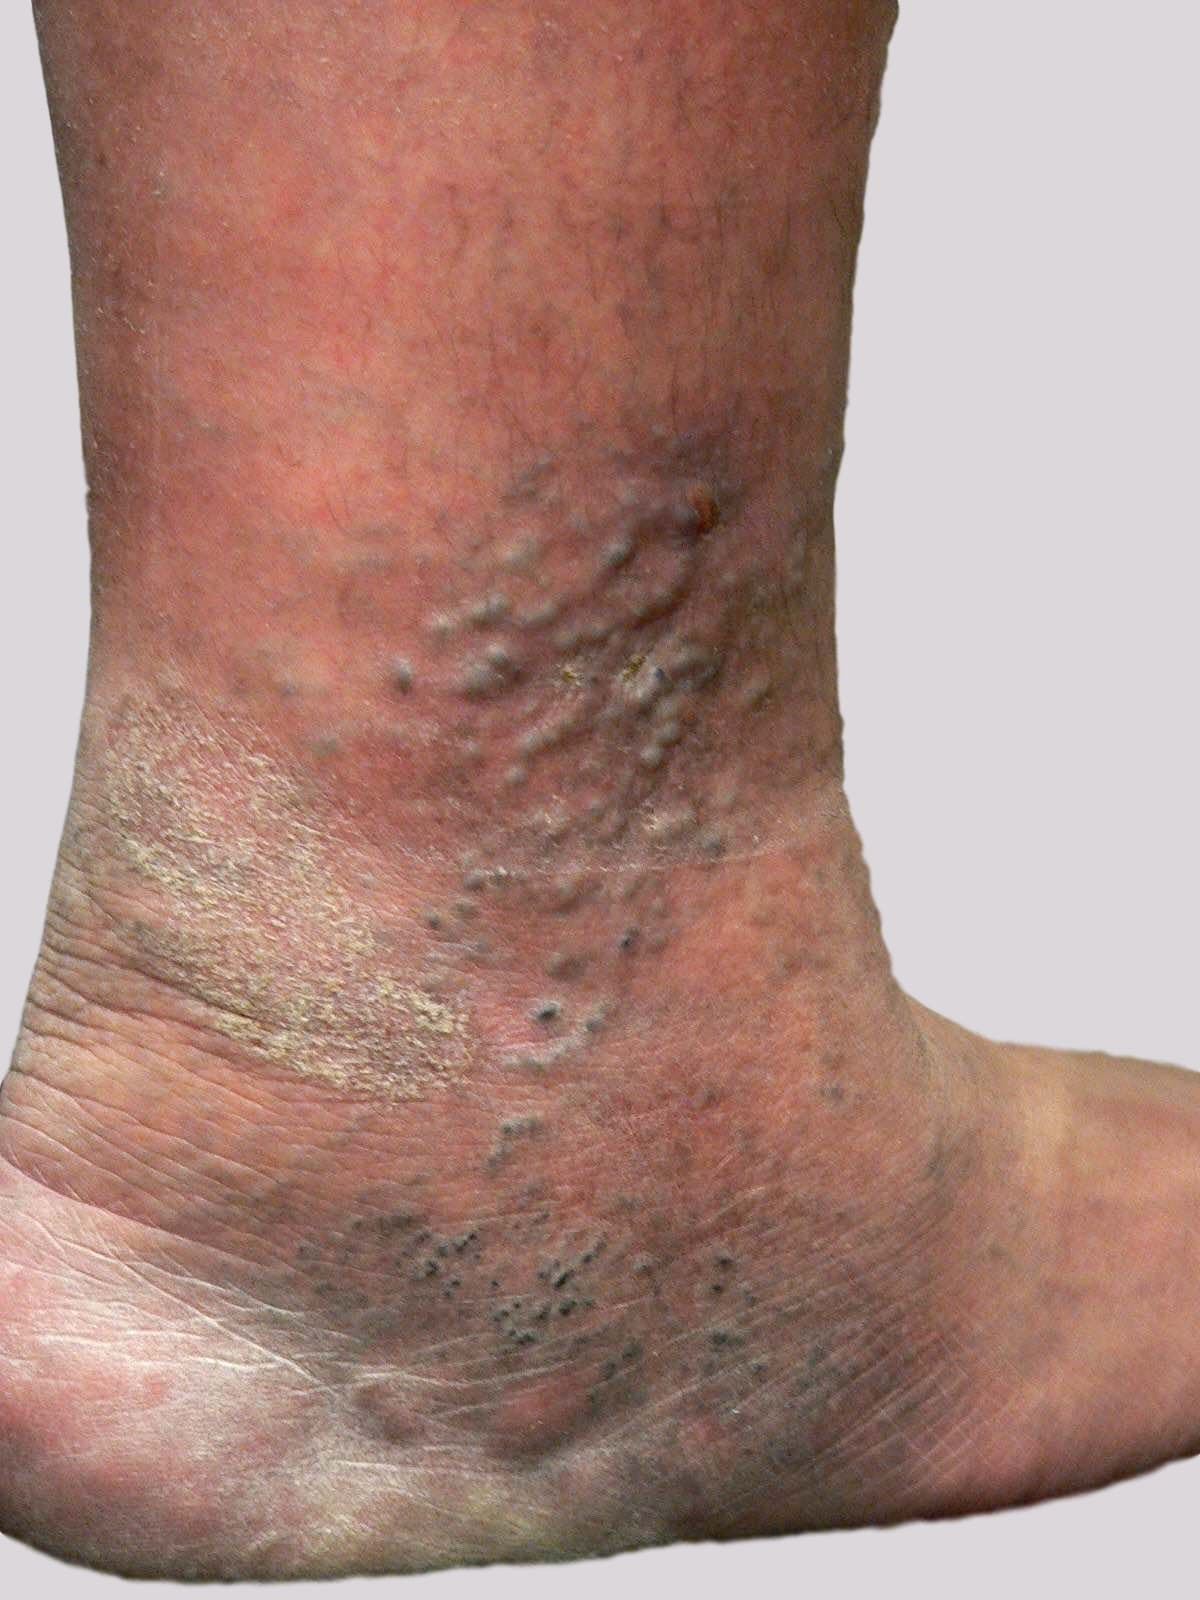 Eczema and varicose veins with very shallow "blue blebs" present